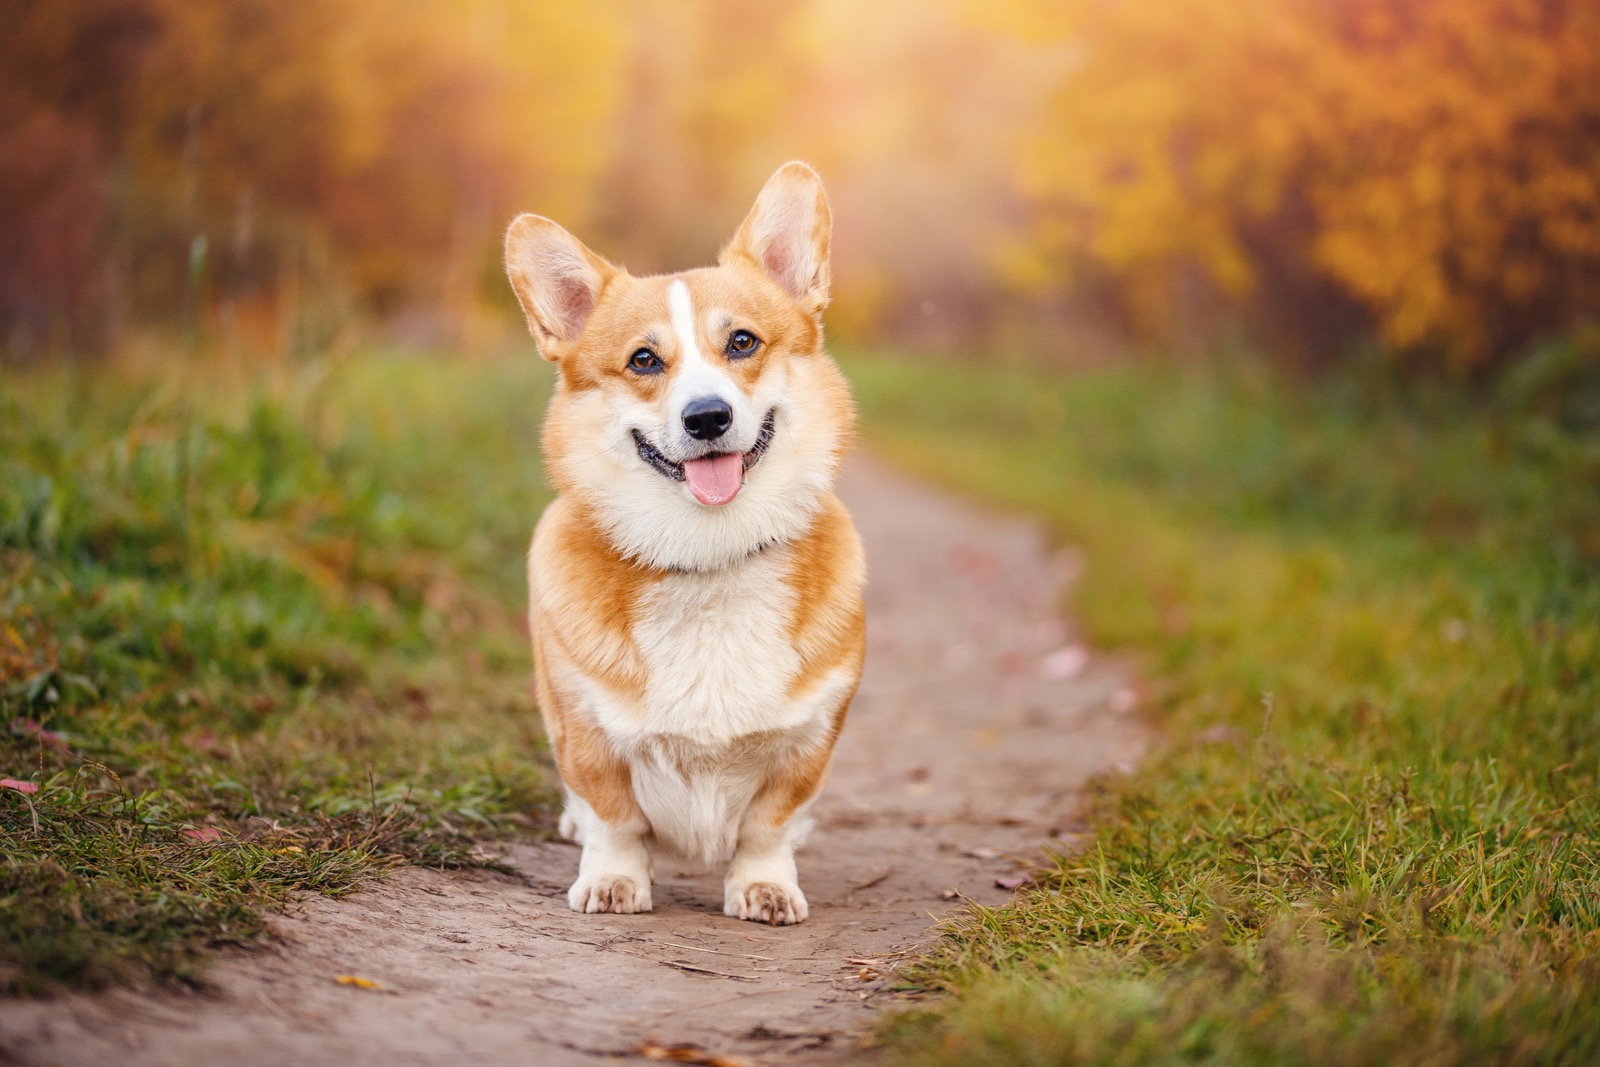 Only the Biggest – And I Mean BIGGEST – English Language Masters Can Pass This Test Welsh Corgi dog